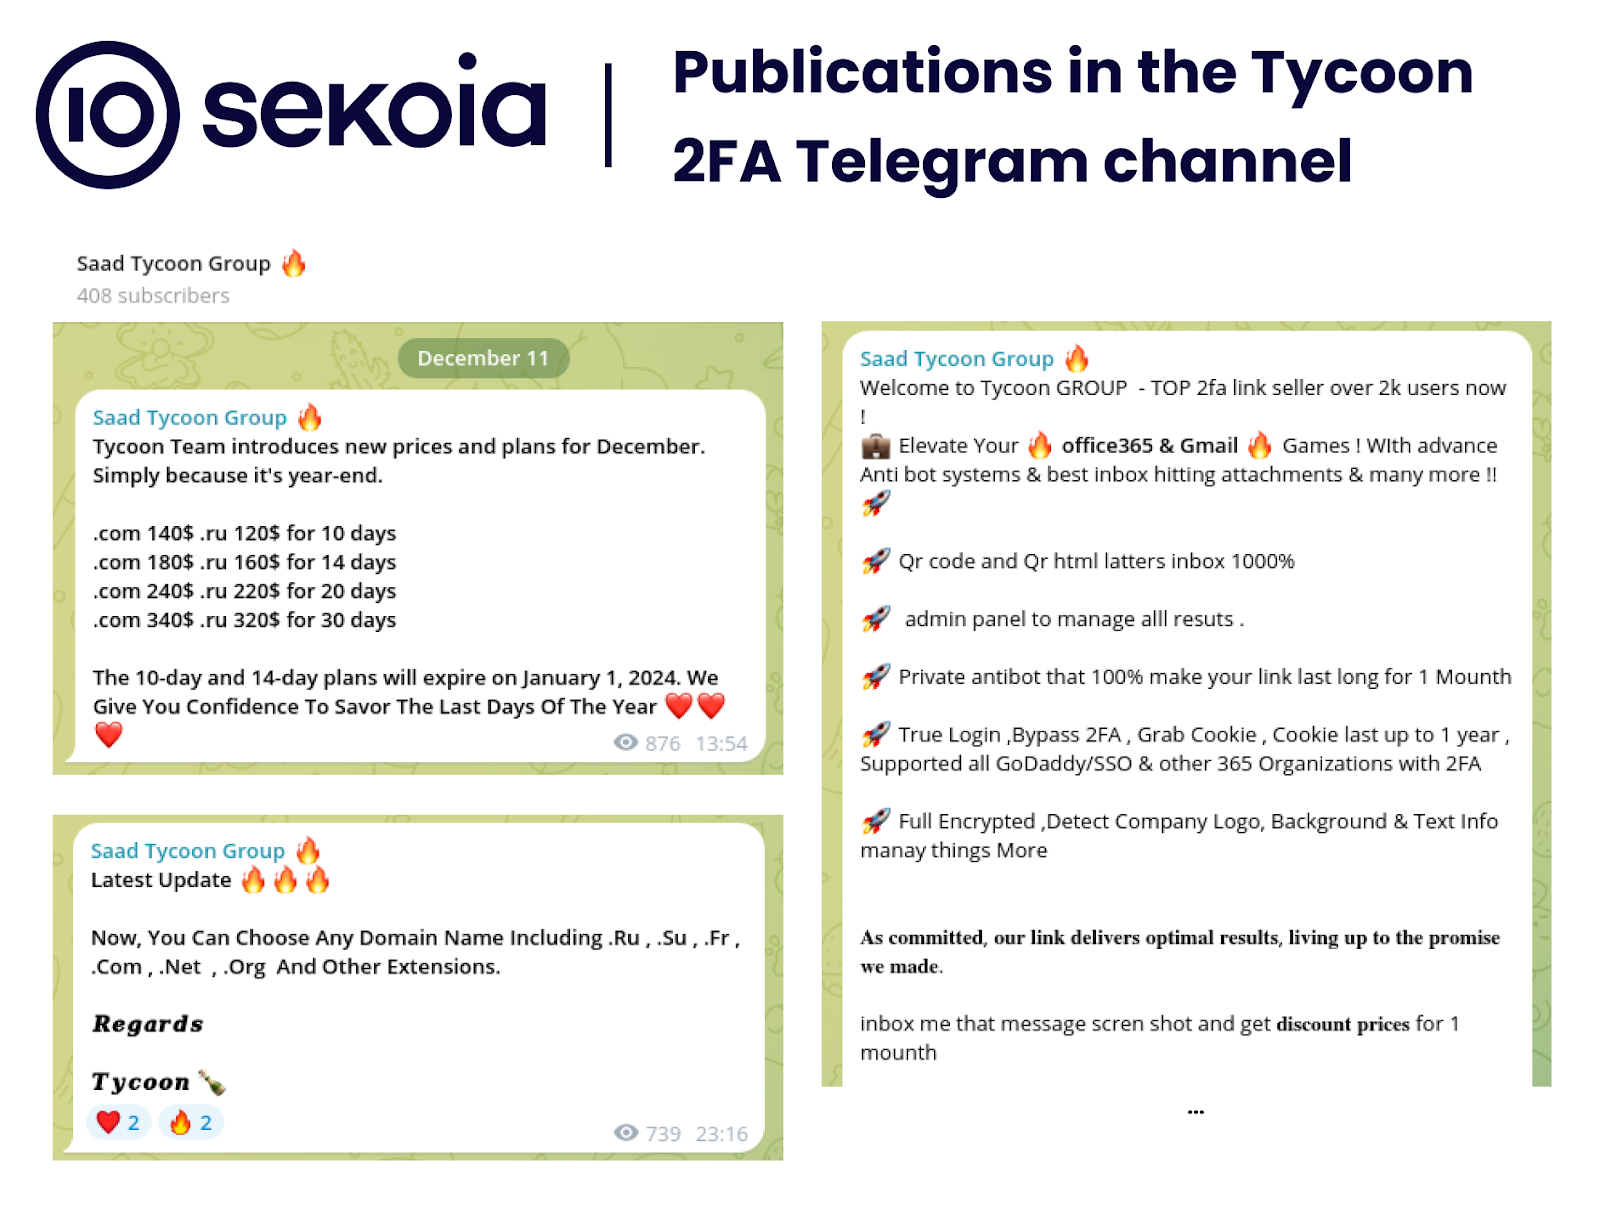 Publications in the Tycoon 2FA Telegram channel named “Saad Tycoon Group”, advertising the Tycoon 2FA PhaaS